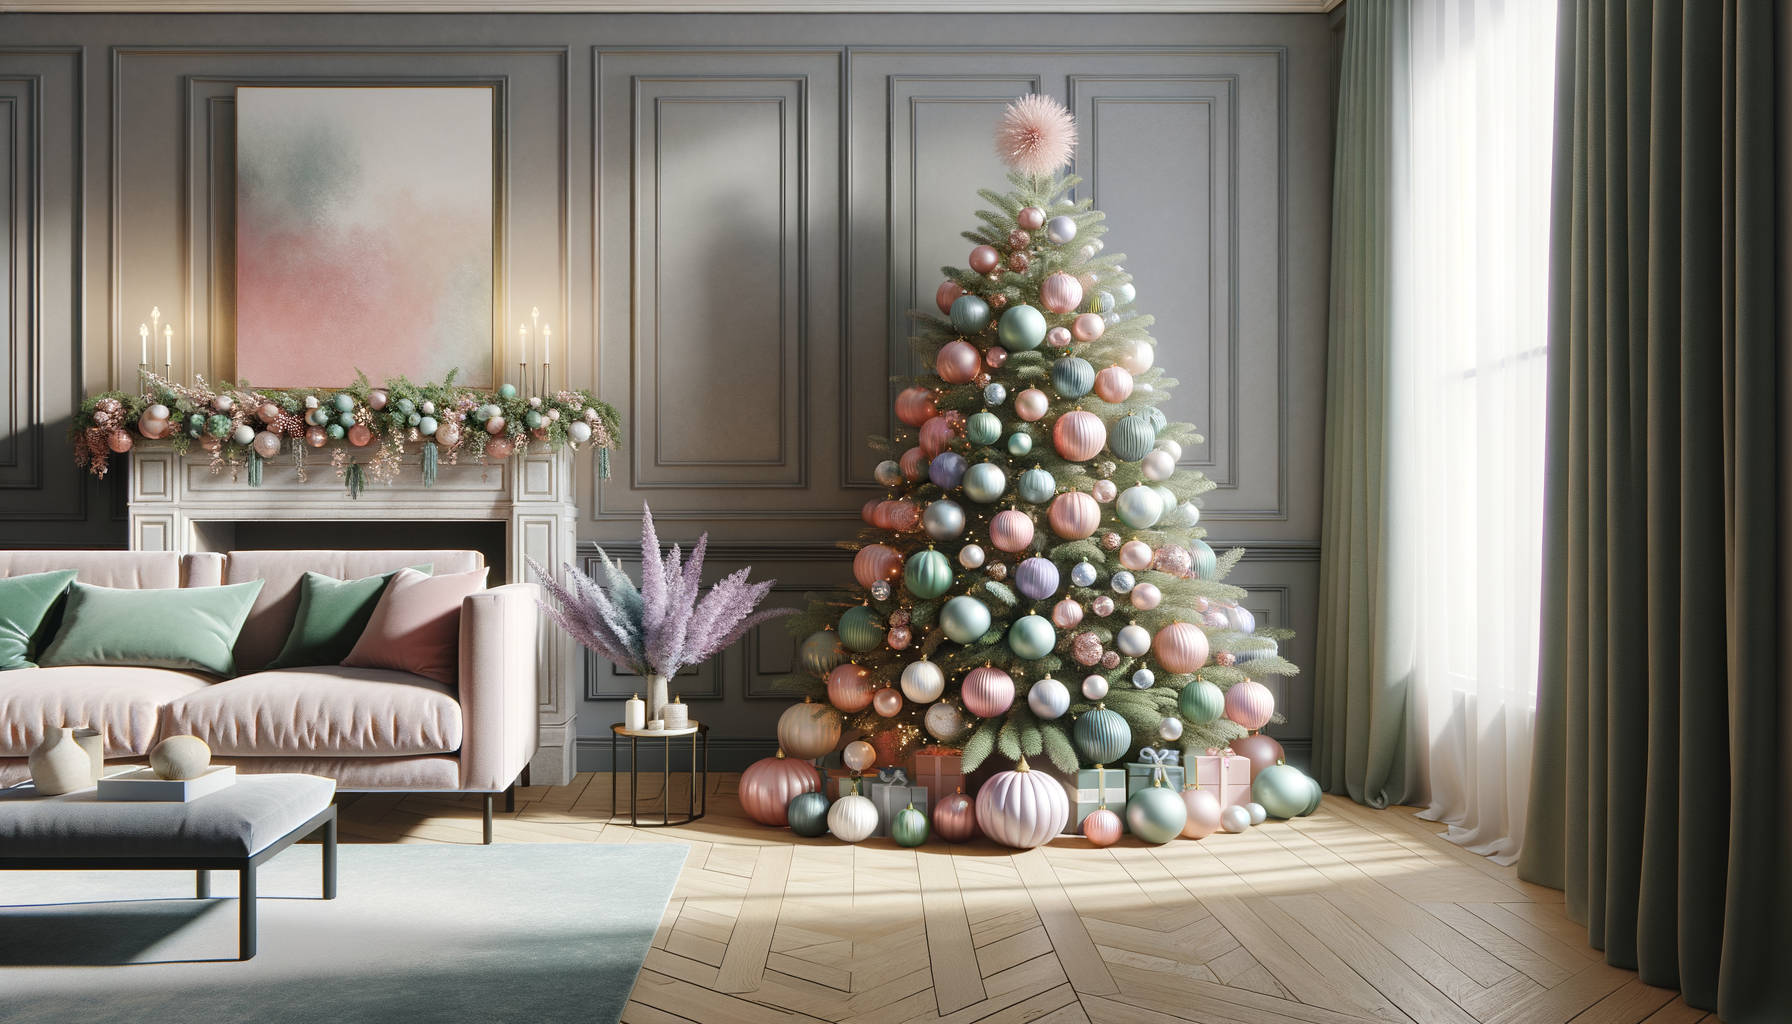 Living room with a Christmas tree that has pink, mint green, lavender ornaments.